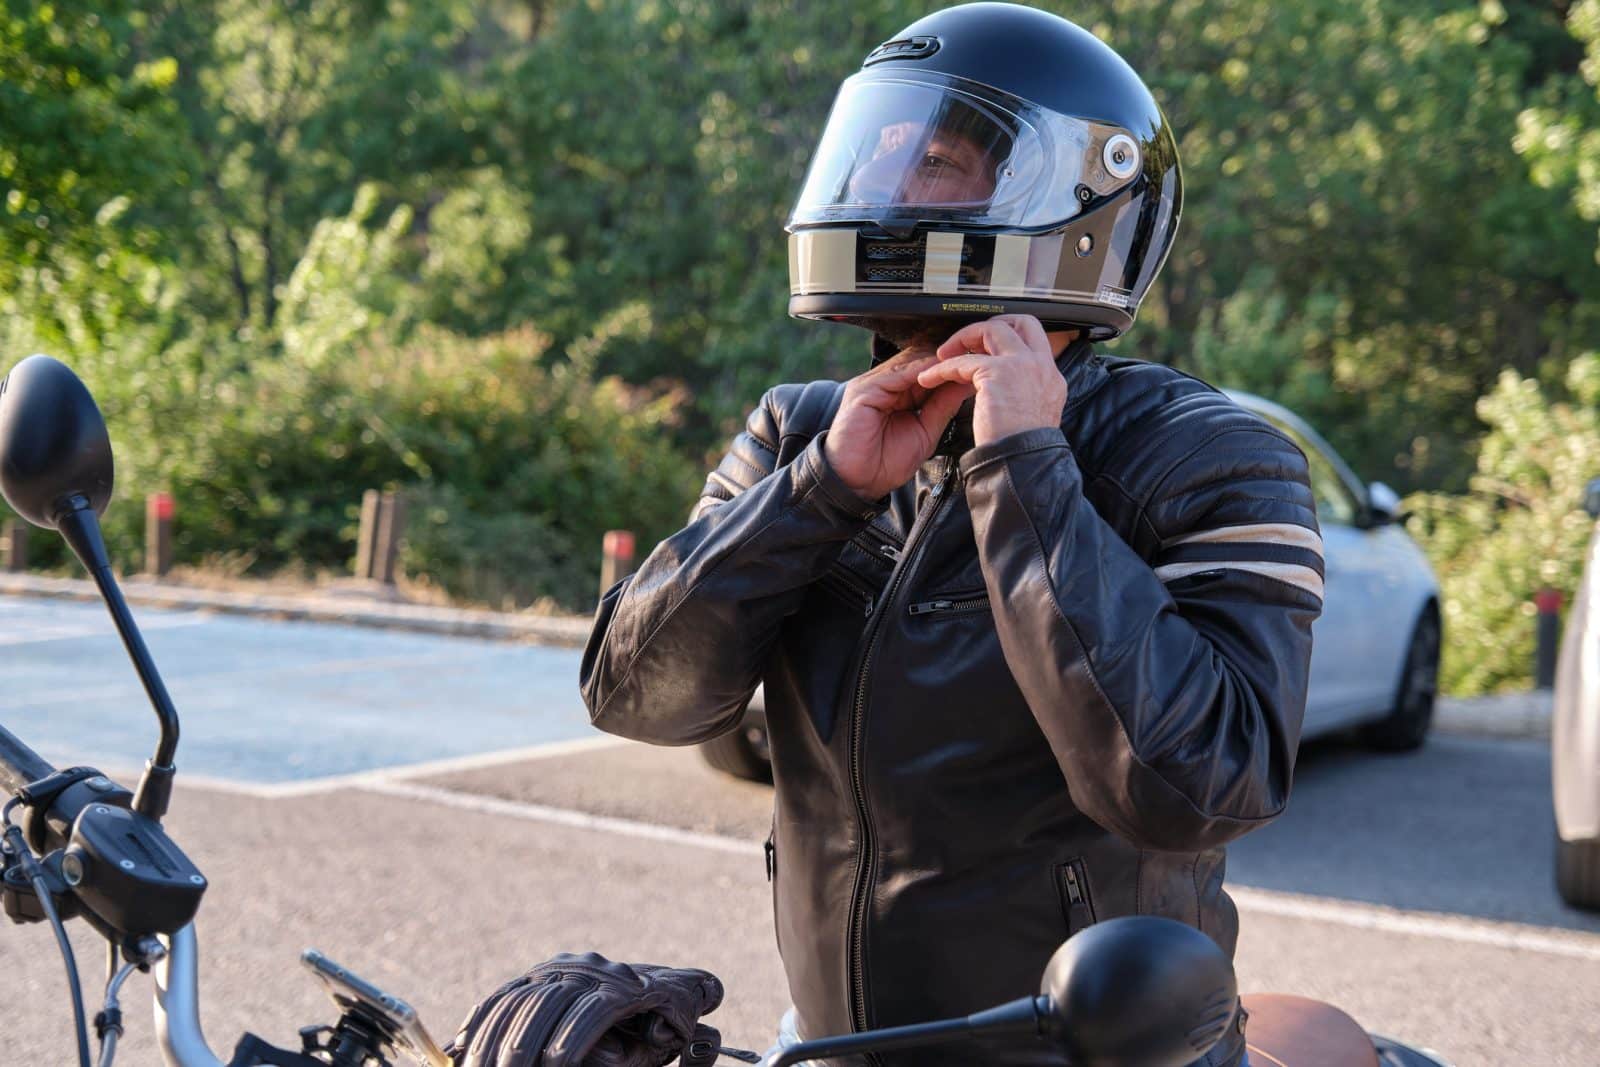 We care about you knowing motorcycle safety resources.